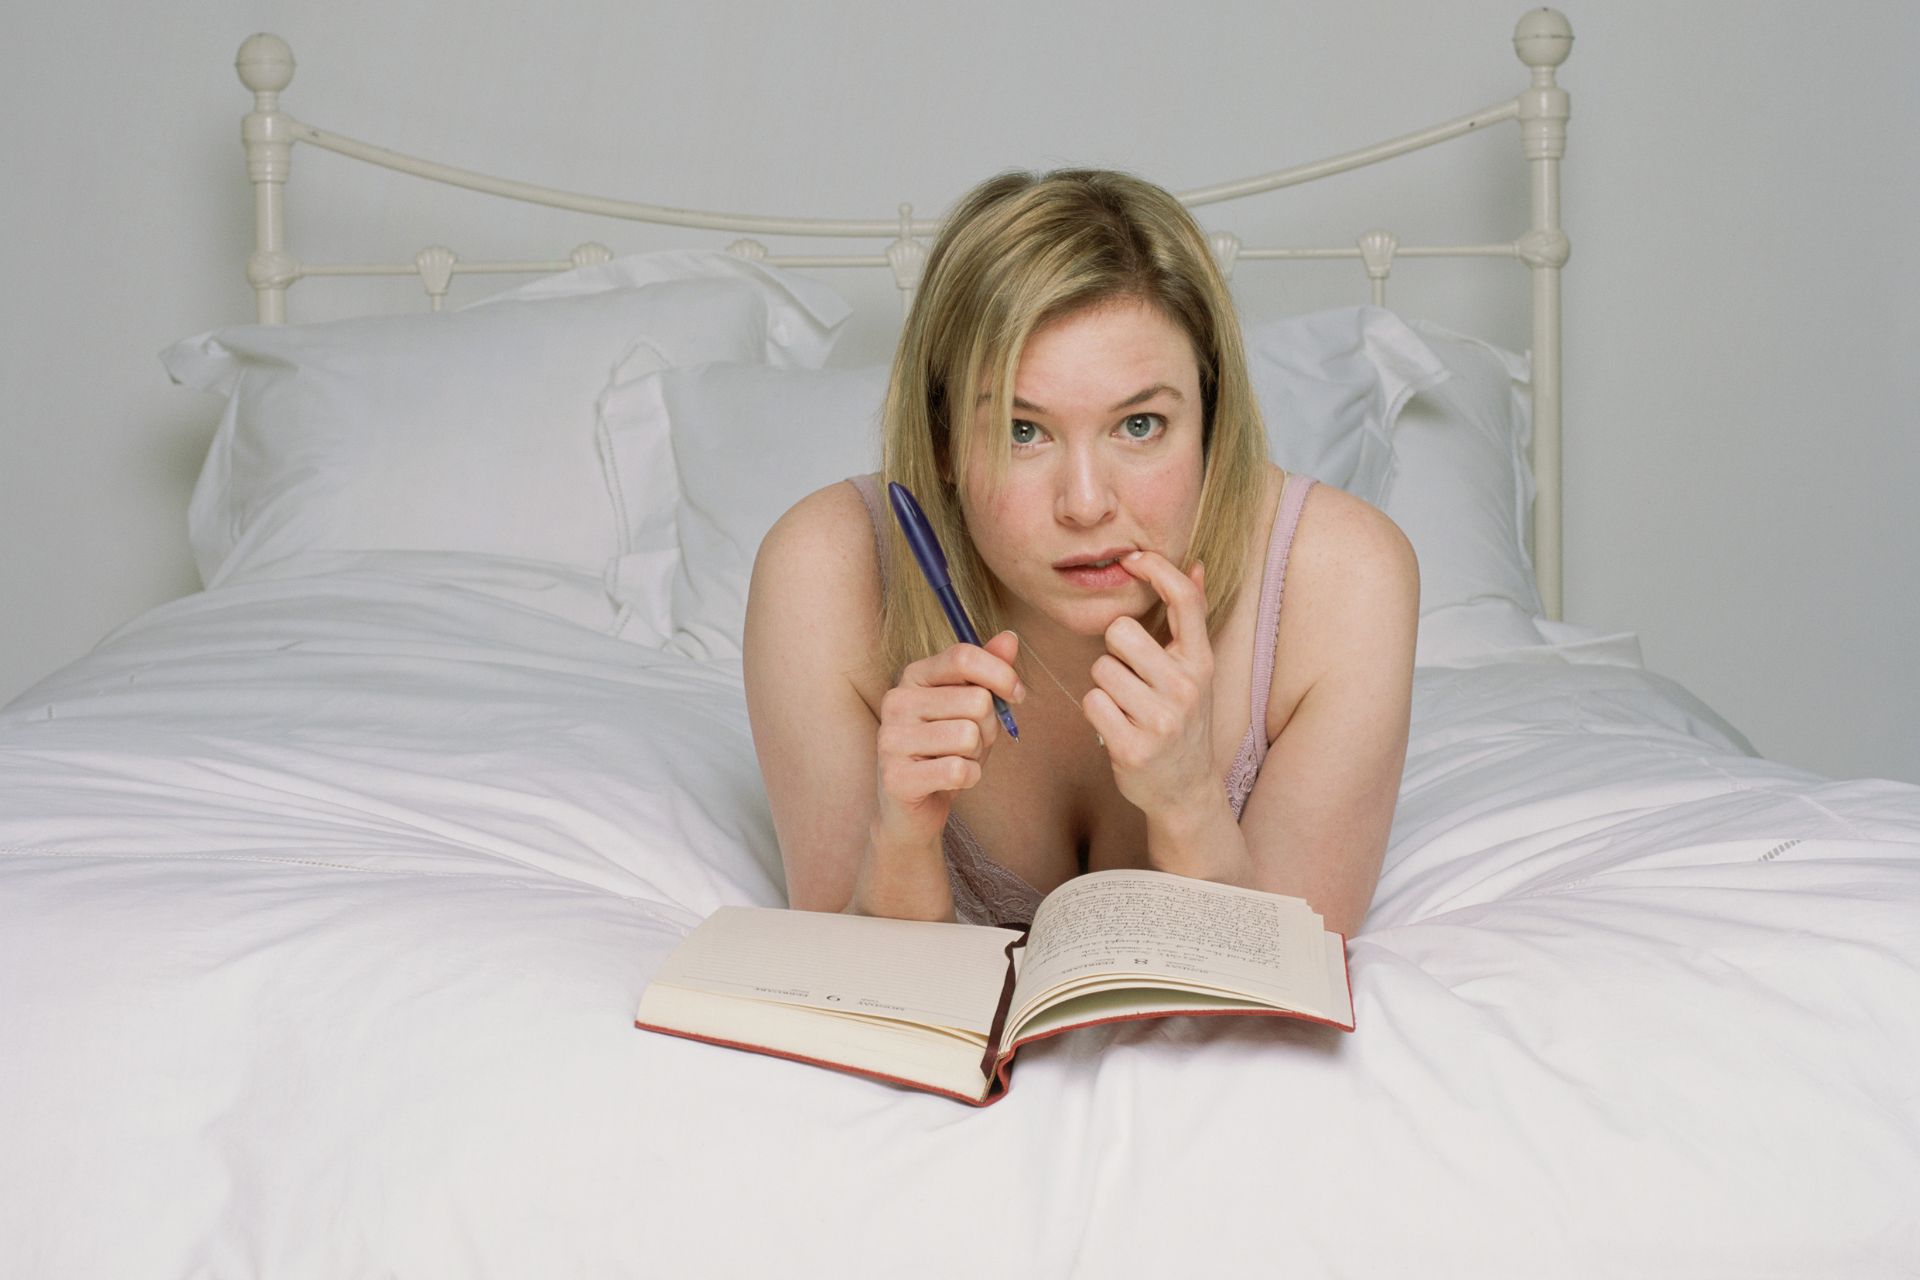 Bridget Jones 4 Is Coming: Here’s Everything We Know So Far